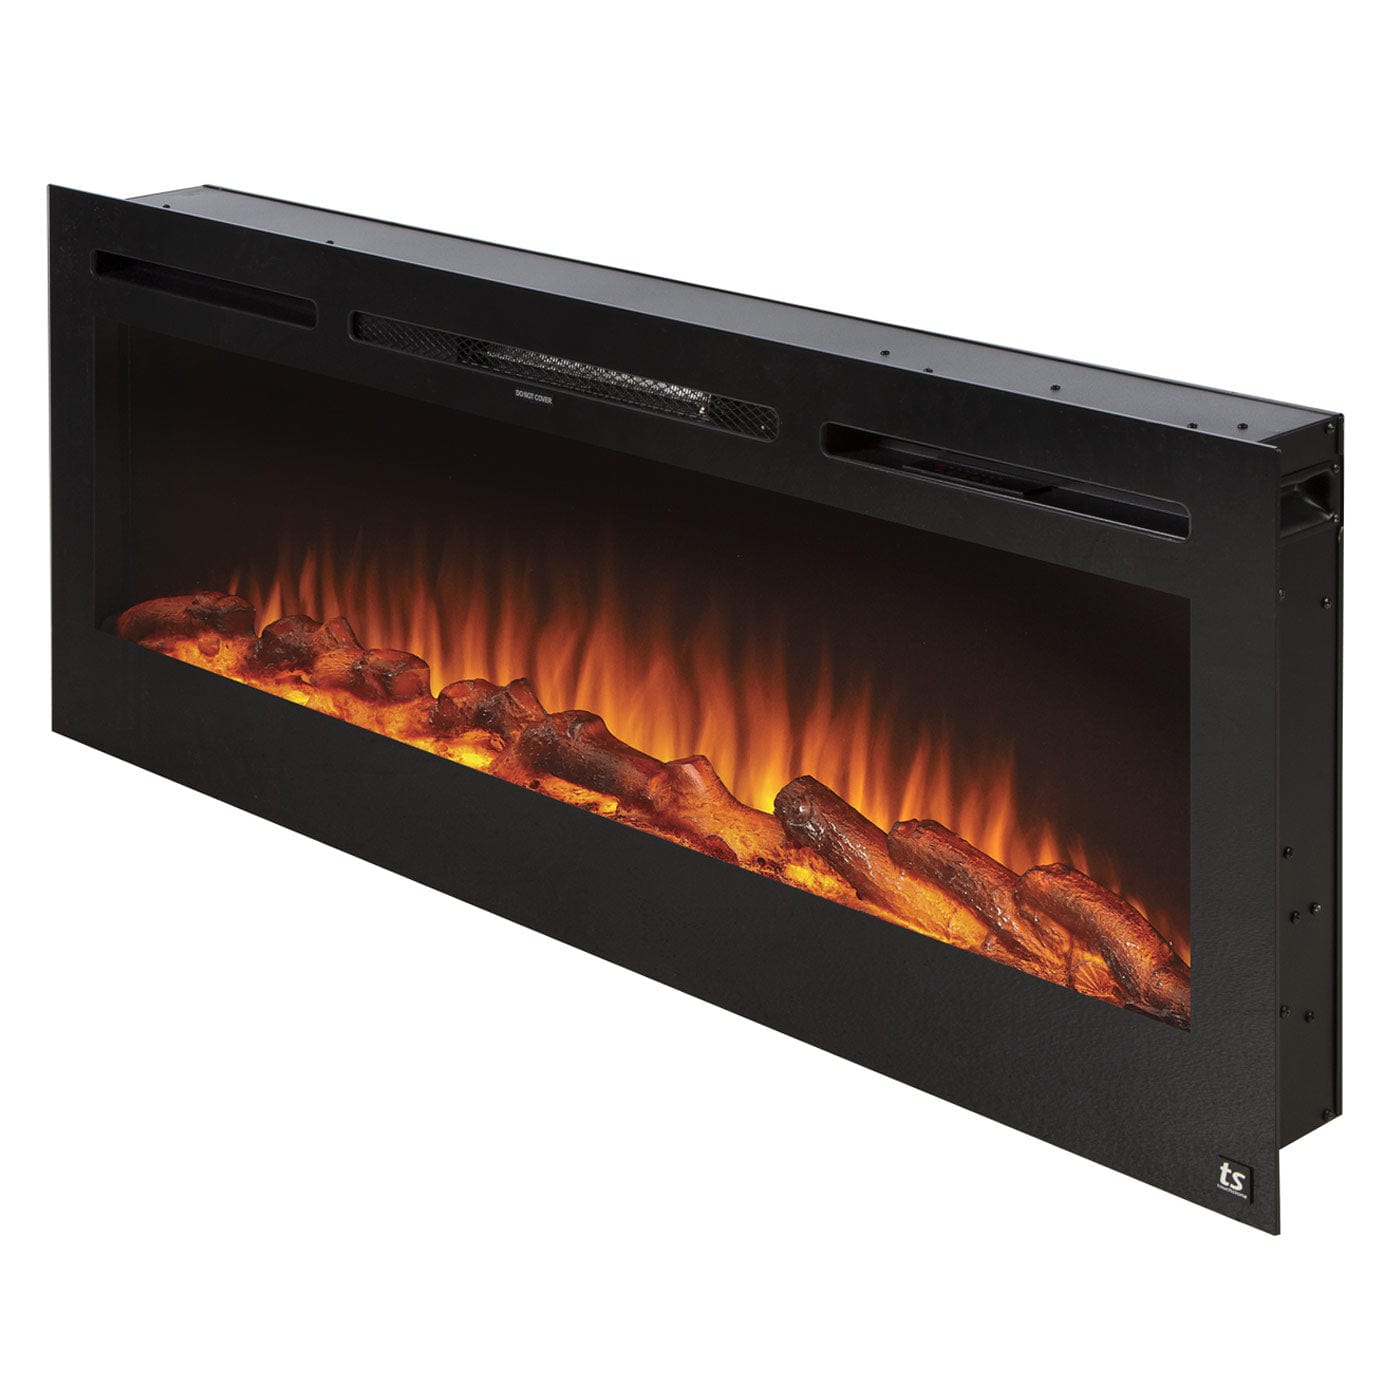 Touchstone Sideline 50 Electric Fireplace 80004 with realistic flame display 